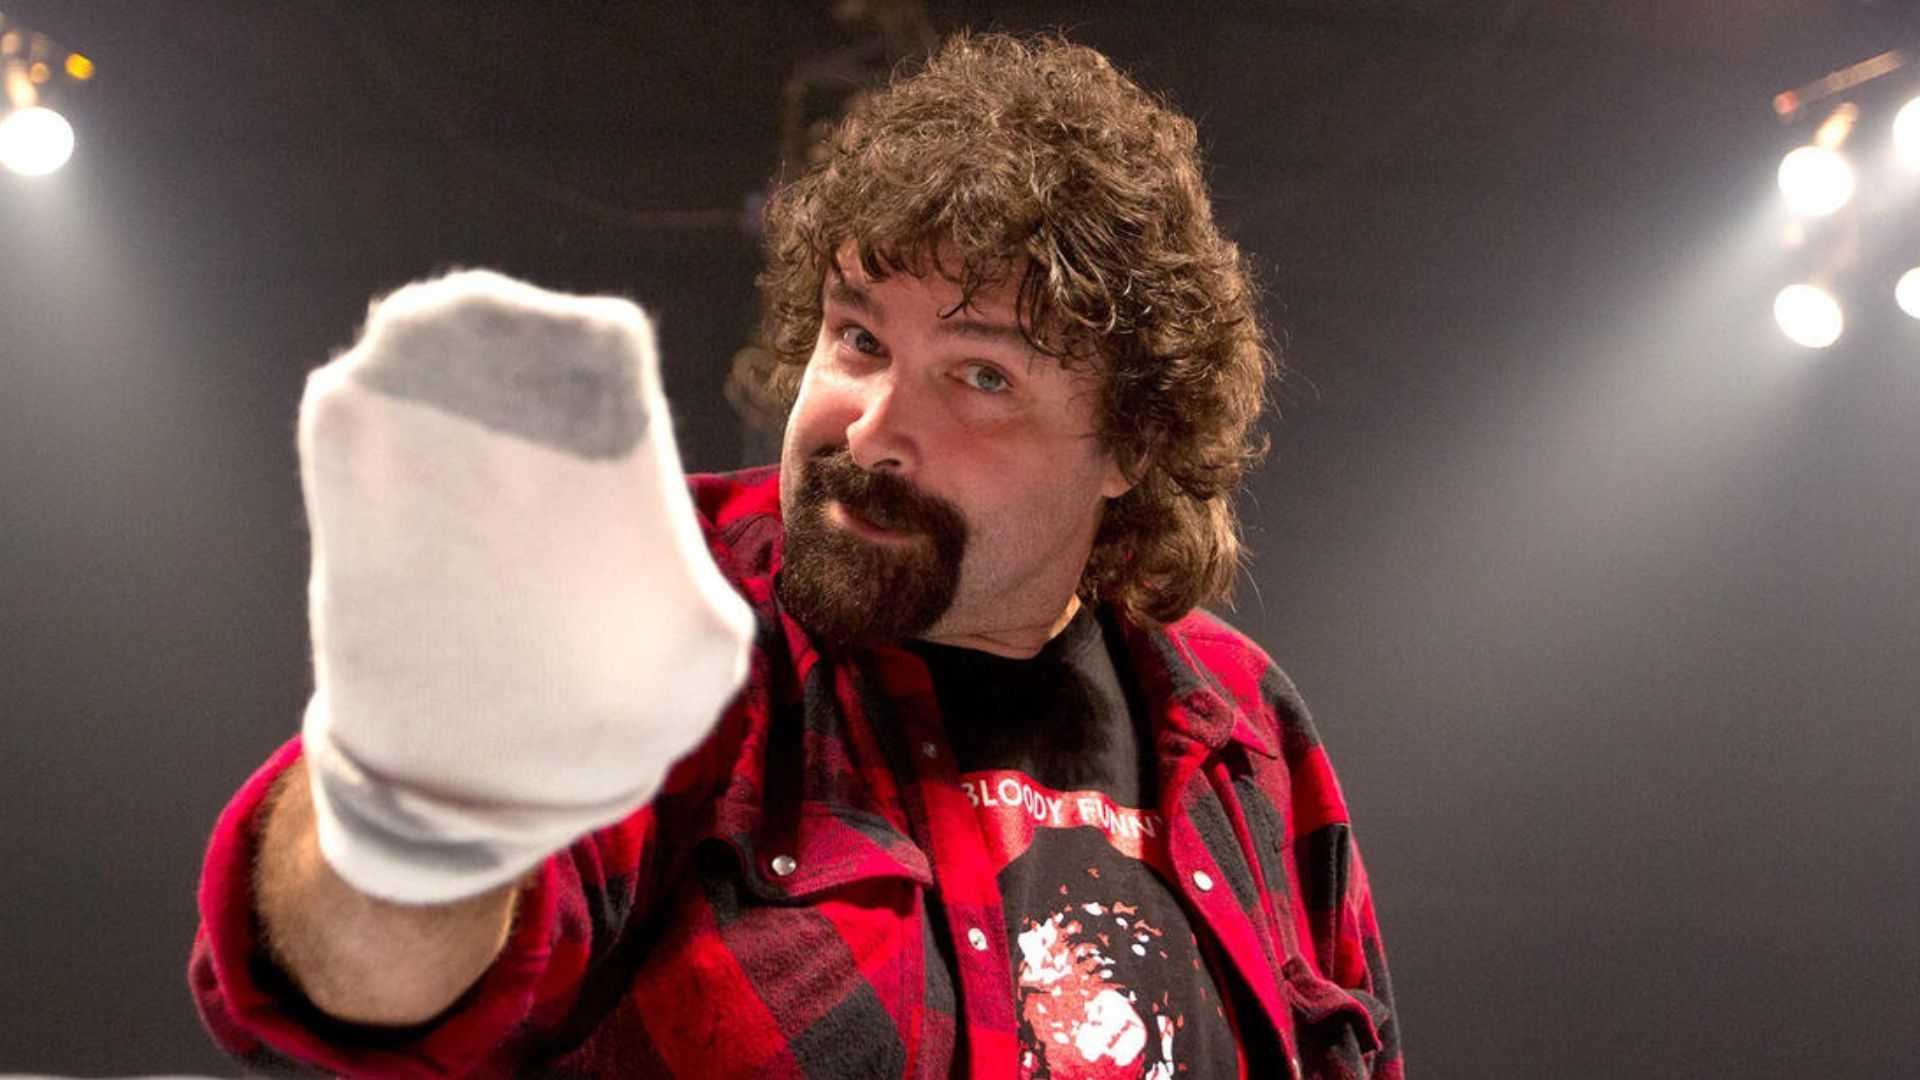 Foley is a legend of the wrestling business.